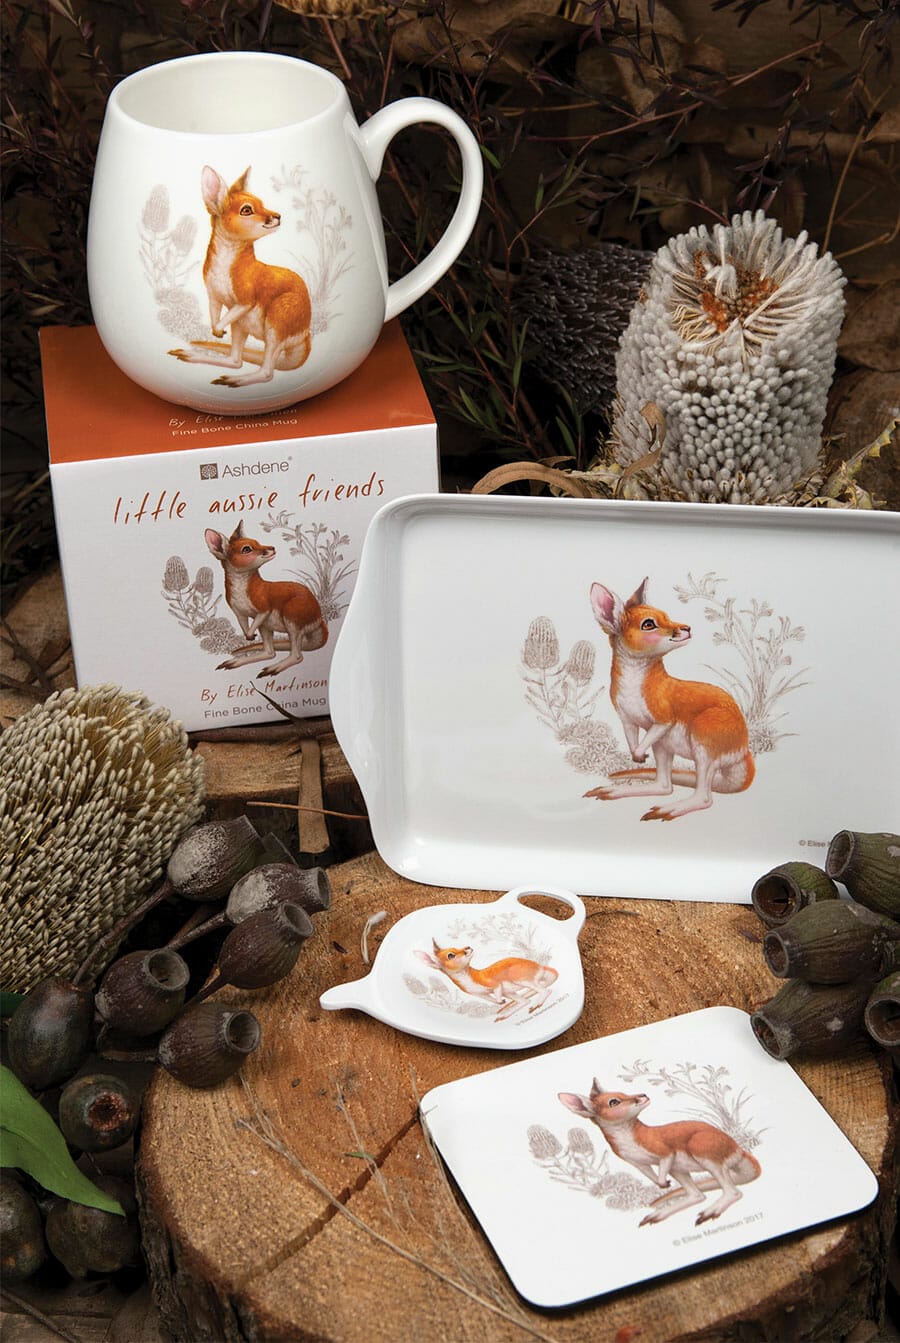 Picture of Little Aussie Friends article showing baby Australian animal tableware kangaroo product group shot